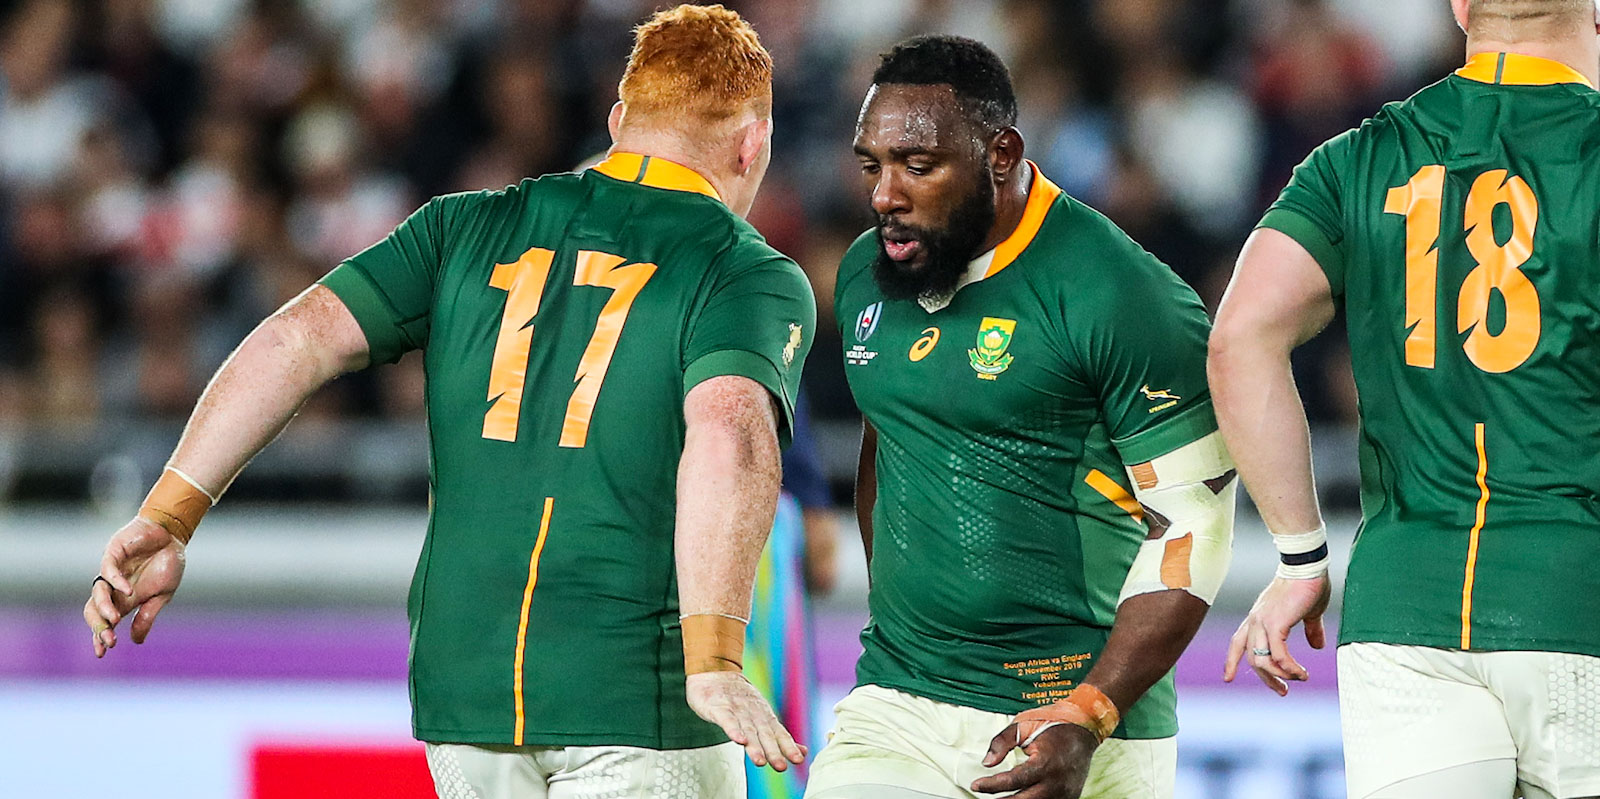 In 2009, Steven Kitshoff was at school, supporting Tendai Mtawarira - and in 2019 they won the RWC with the Springboks.